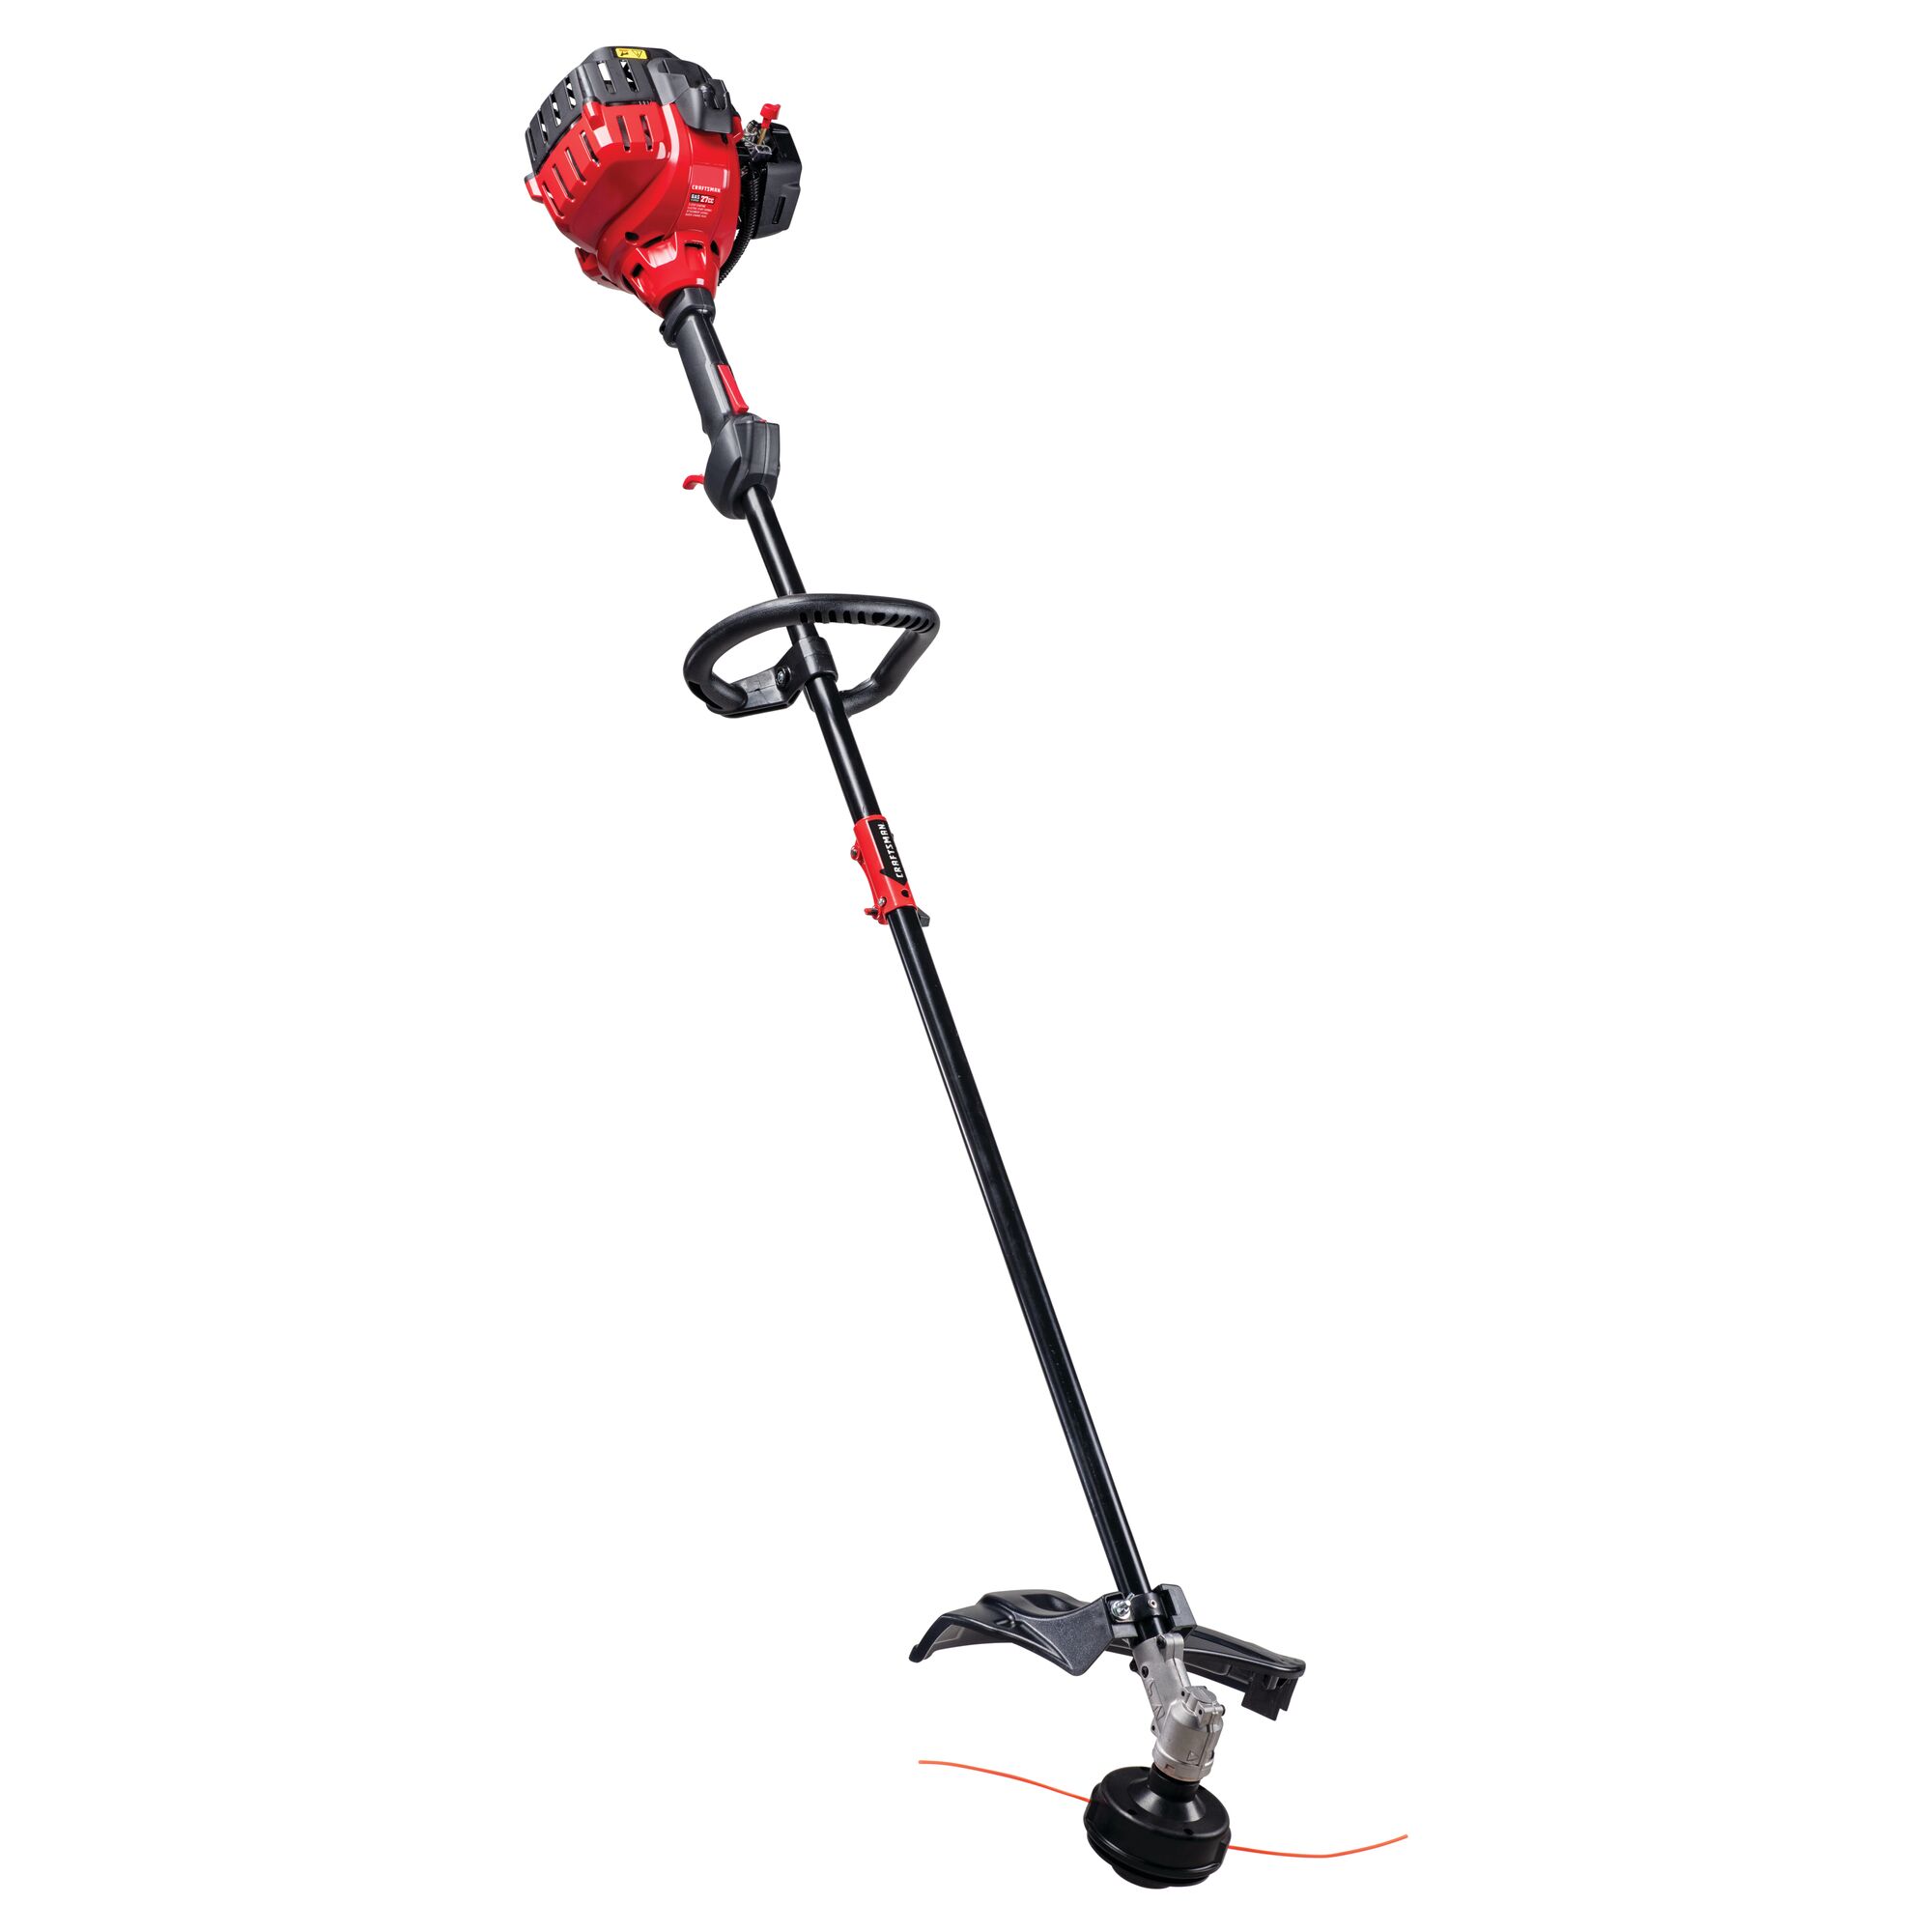 Left profile of 17 inch 2 Cycle straight shaft gas weedwacker string trimmer with attachment capability.